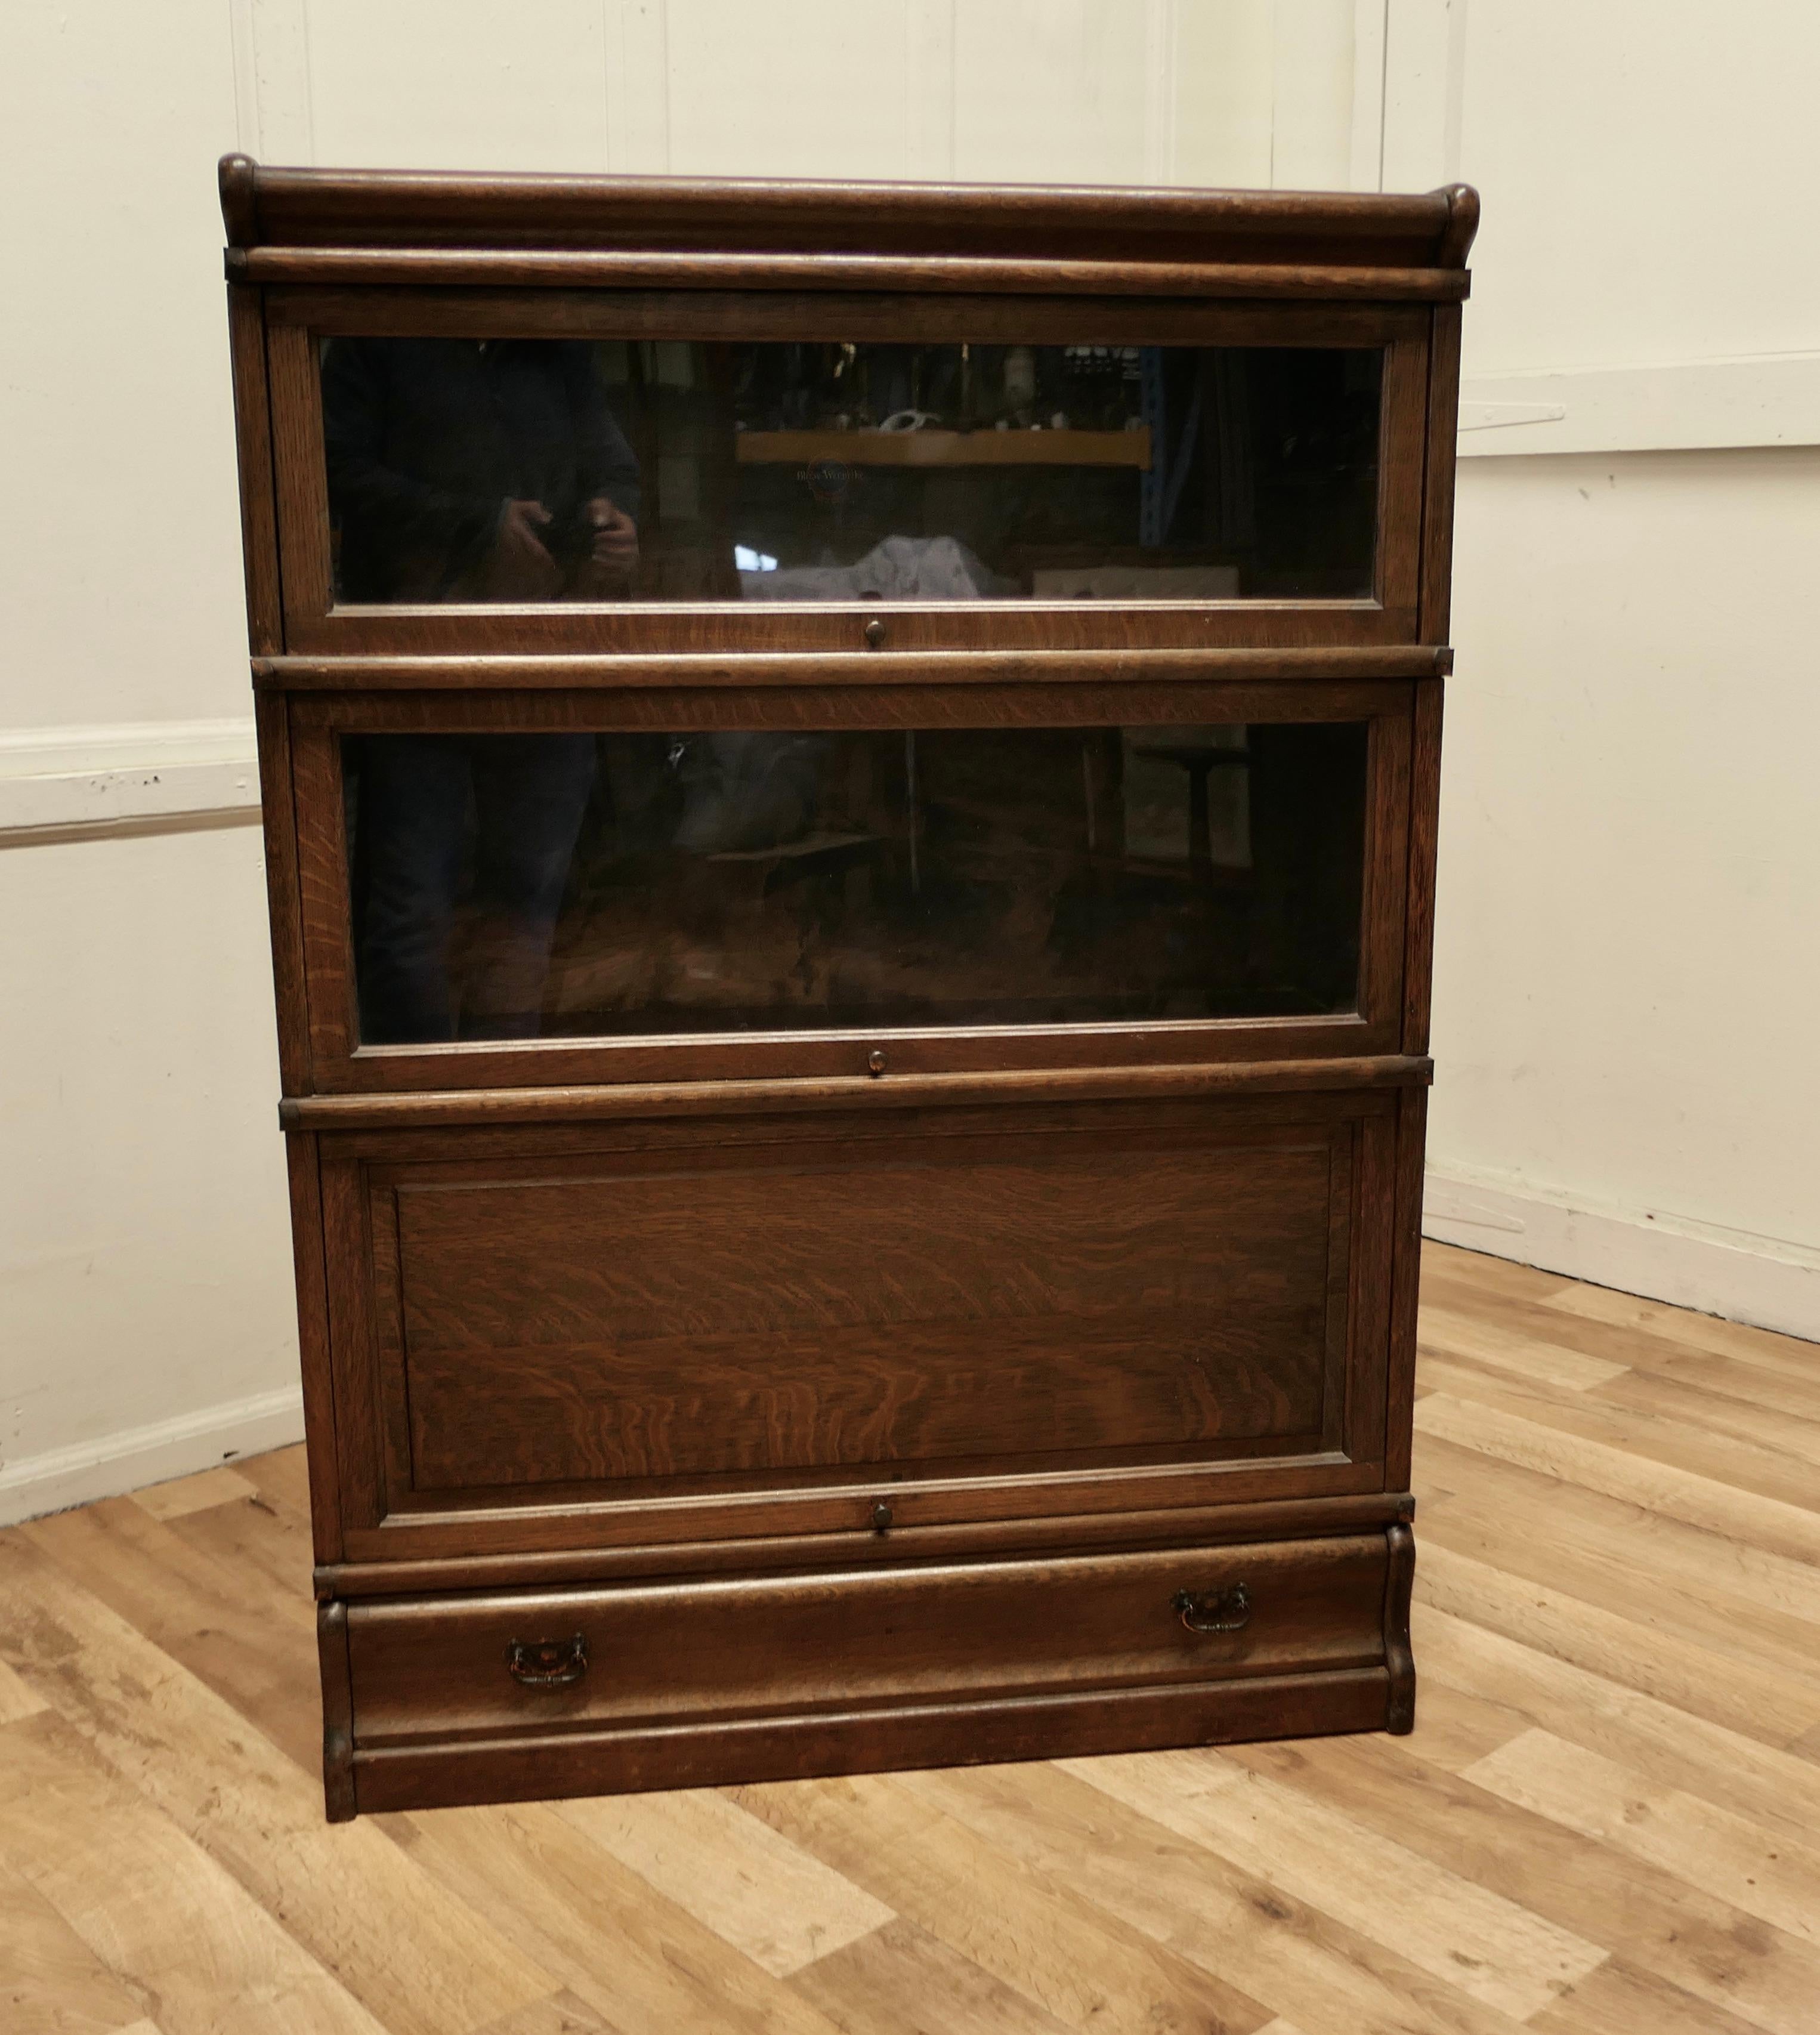 Stacking oak globe Wernicke barristers bookcase or filing cabinet.

This is a good quality bookcase, all of the sections have a copper side banding, the bookcase has a shallow cornice at the top, 2 glazed, sections, one oak panelled section and a